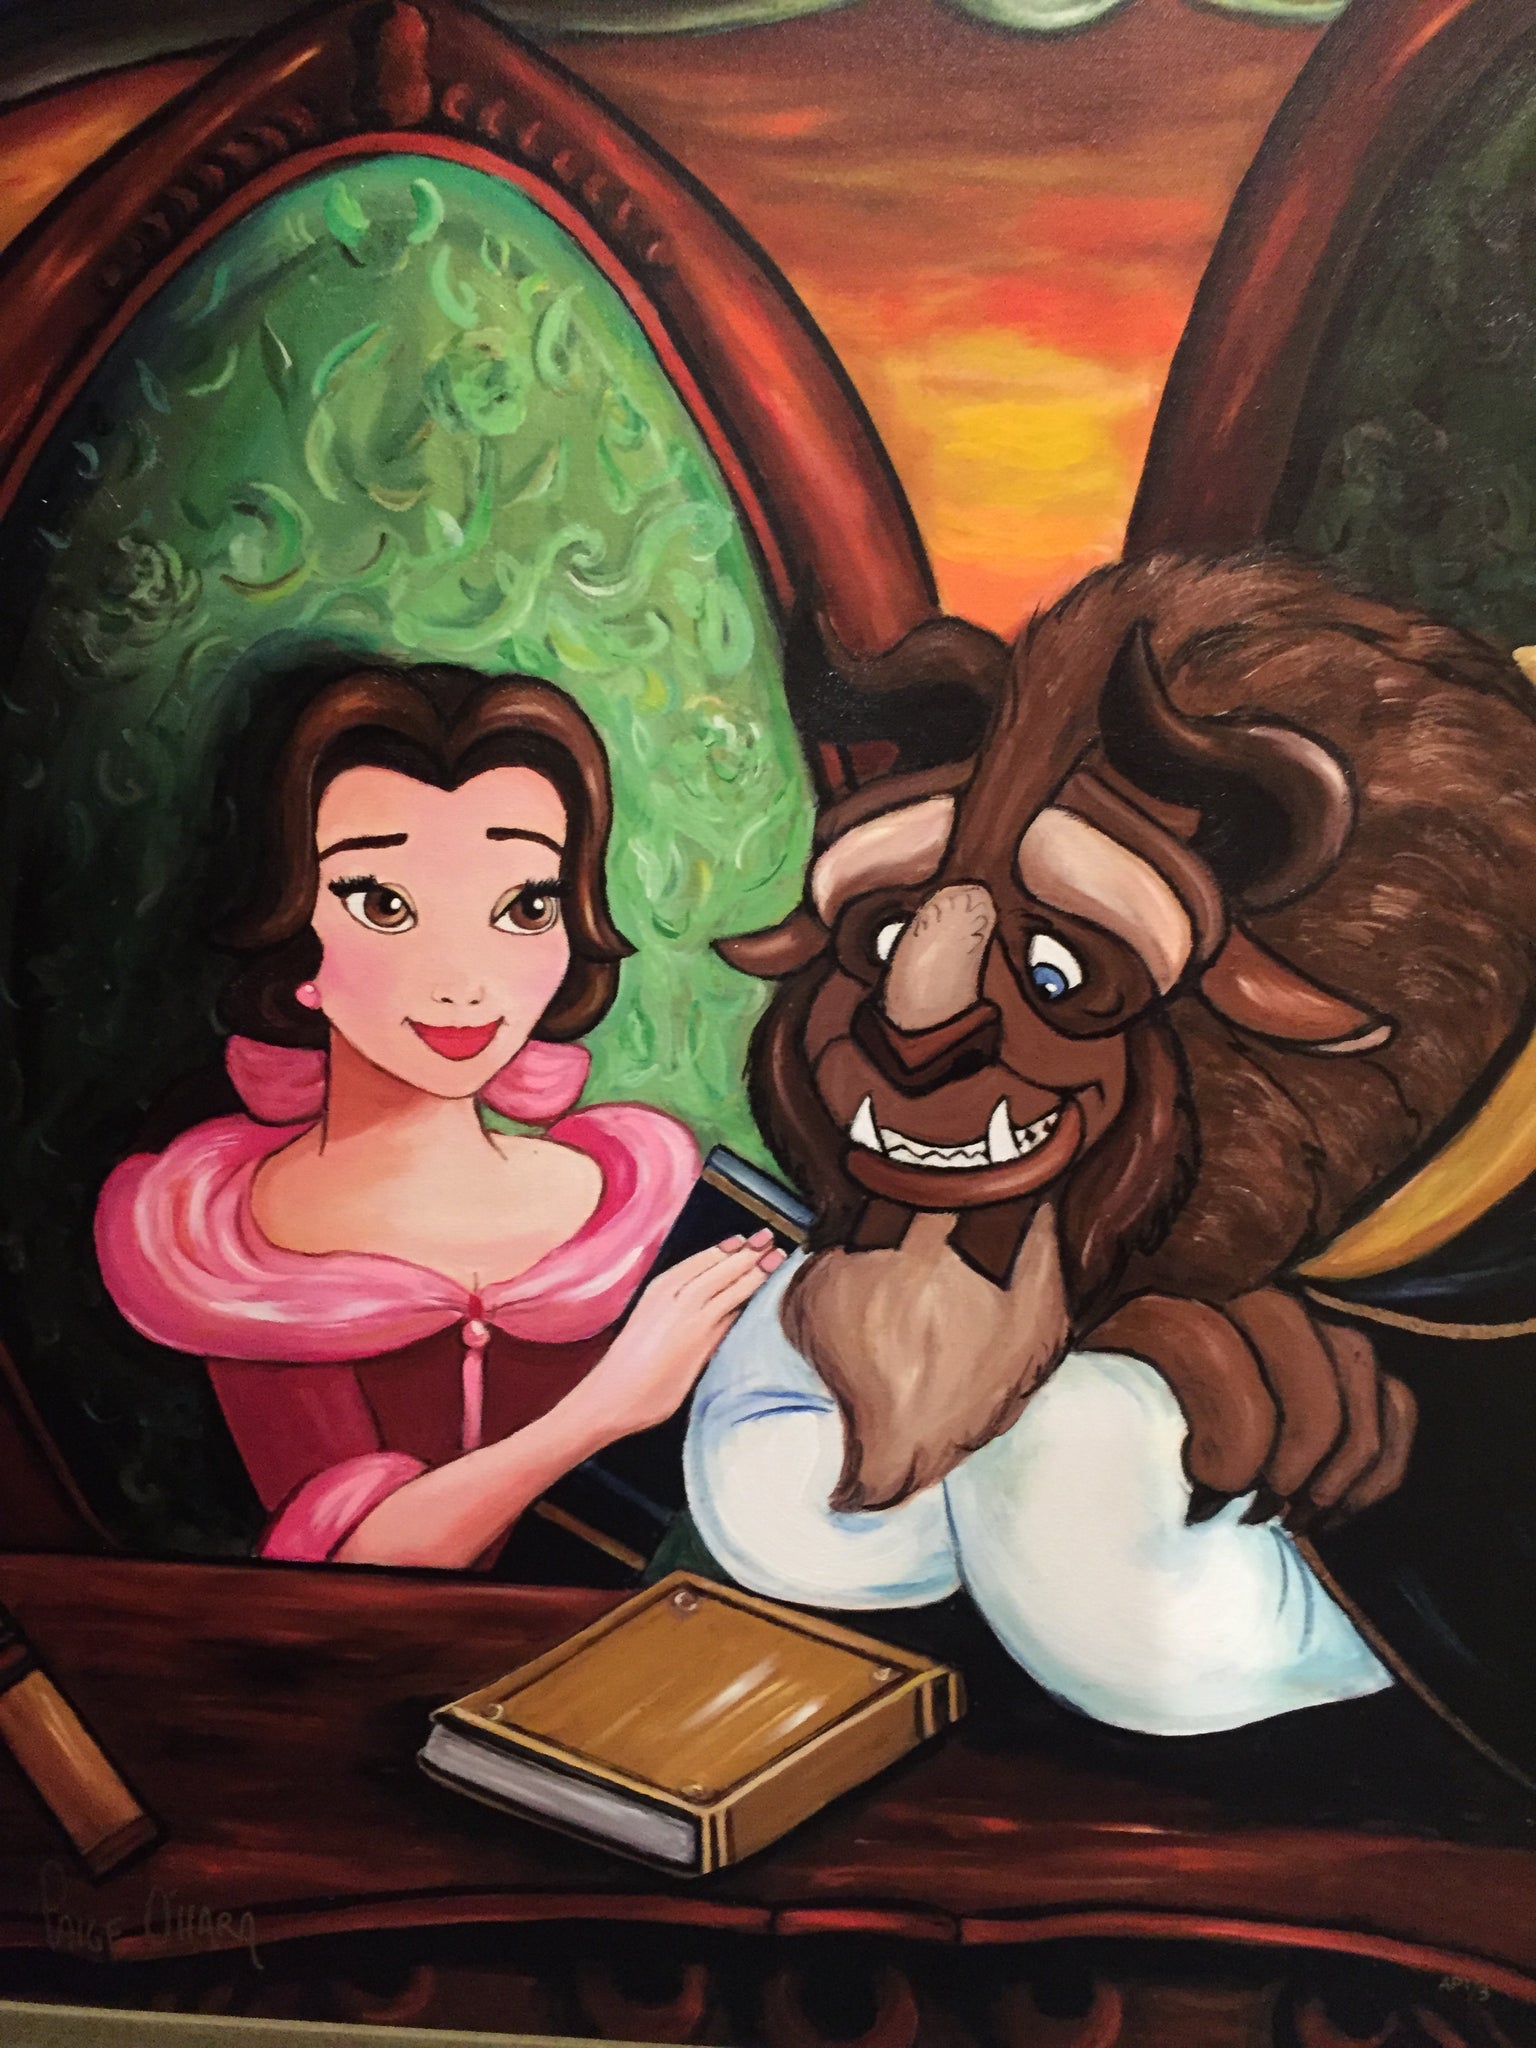 Our Story by Paige O'Hara inspired by Beauty and the Beast